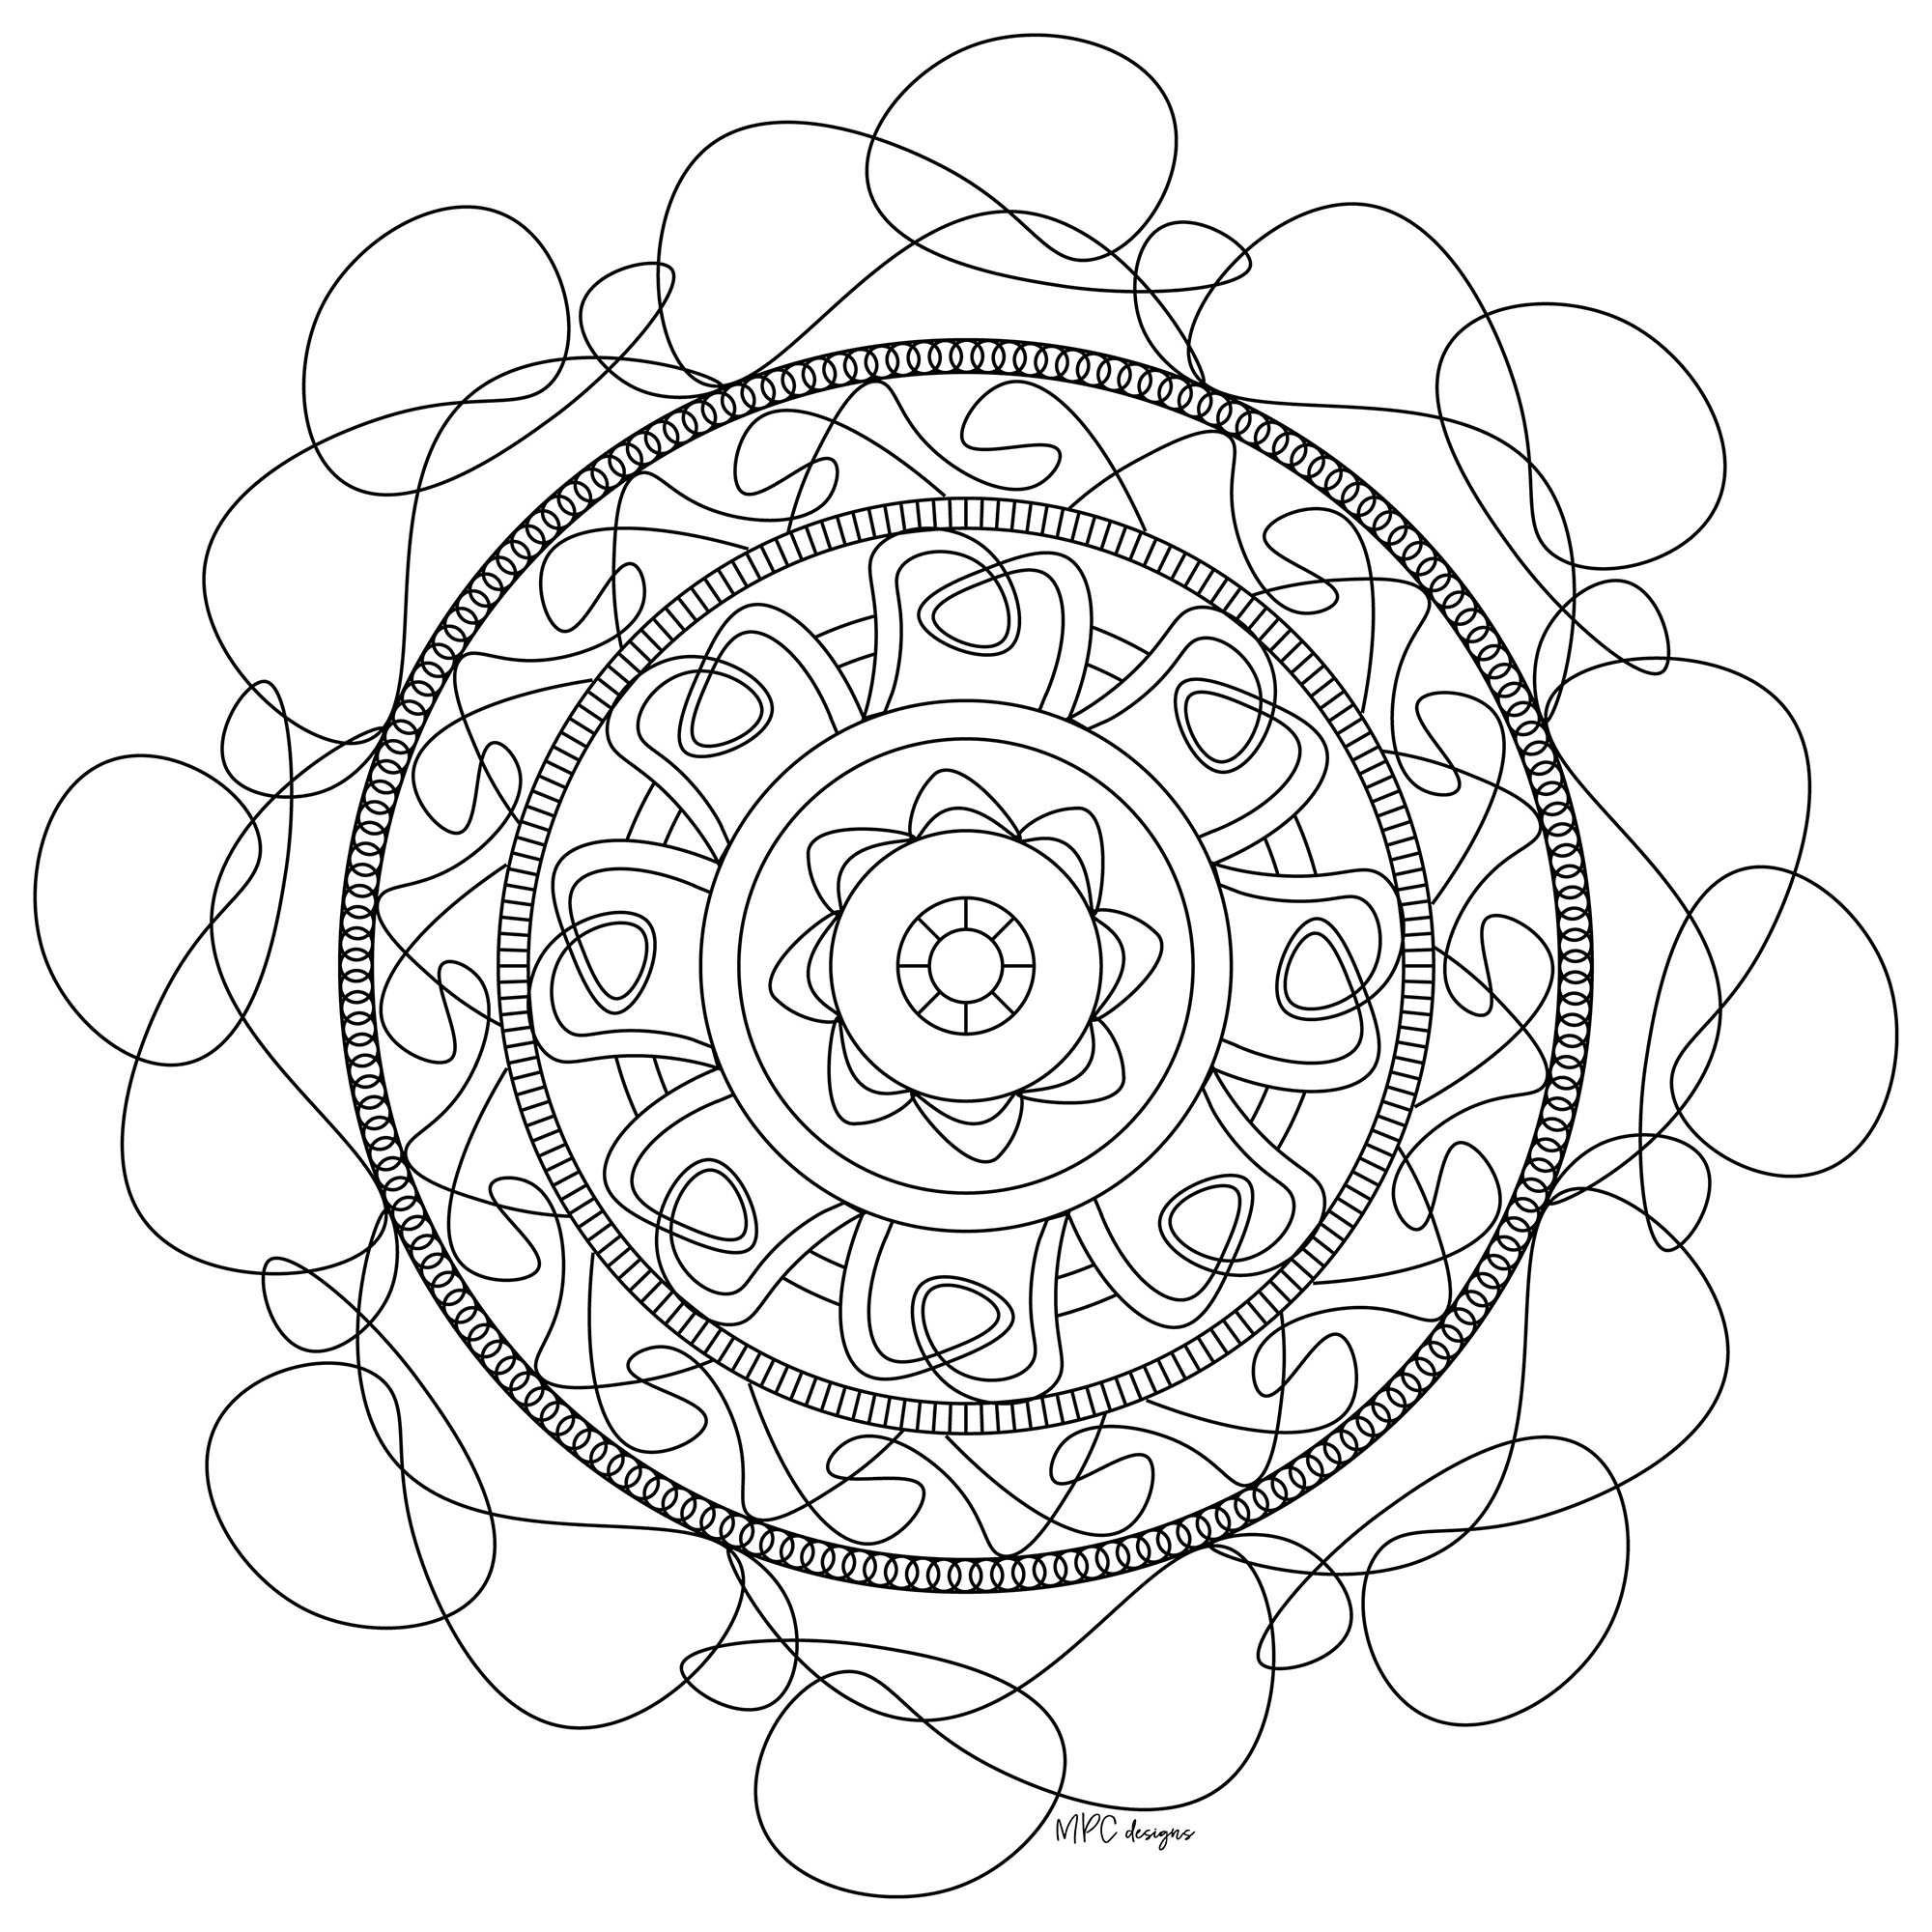 A Mandala out of the ordinary, which will allow you to spend a good time coloring, without complicating your life with too small areas, if it's not what you search for.